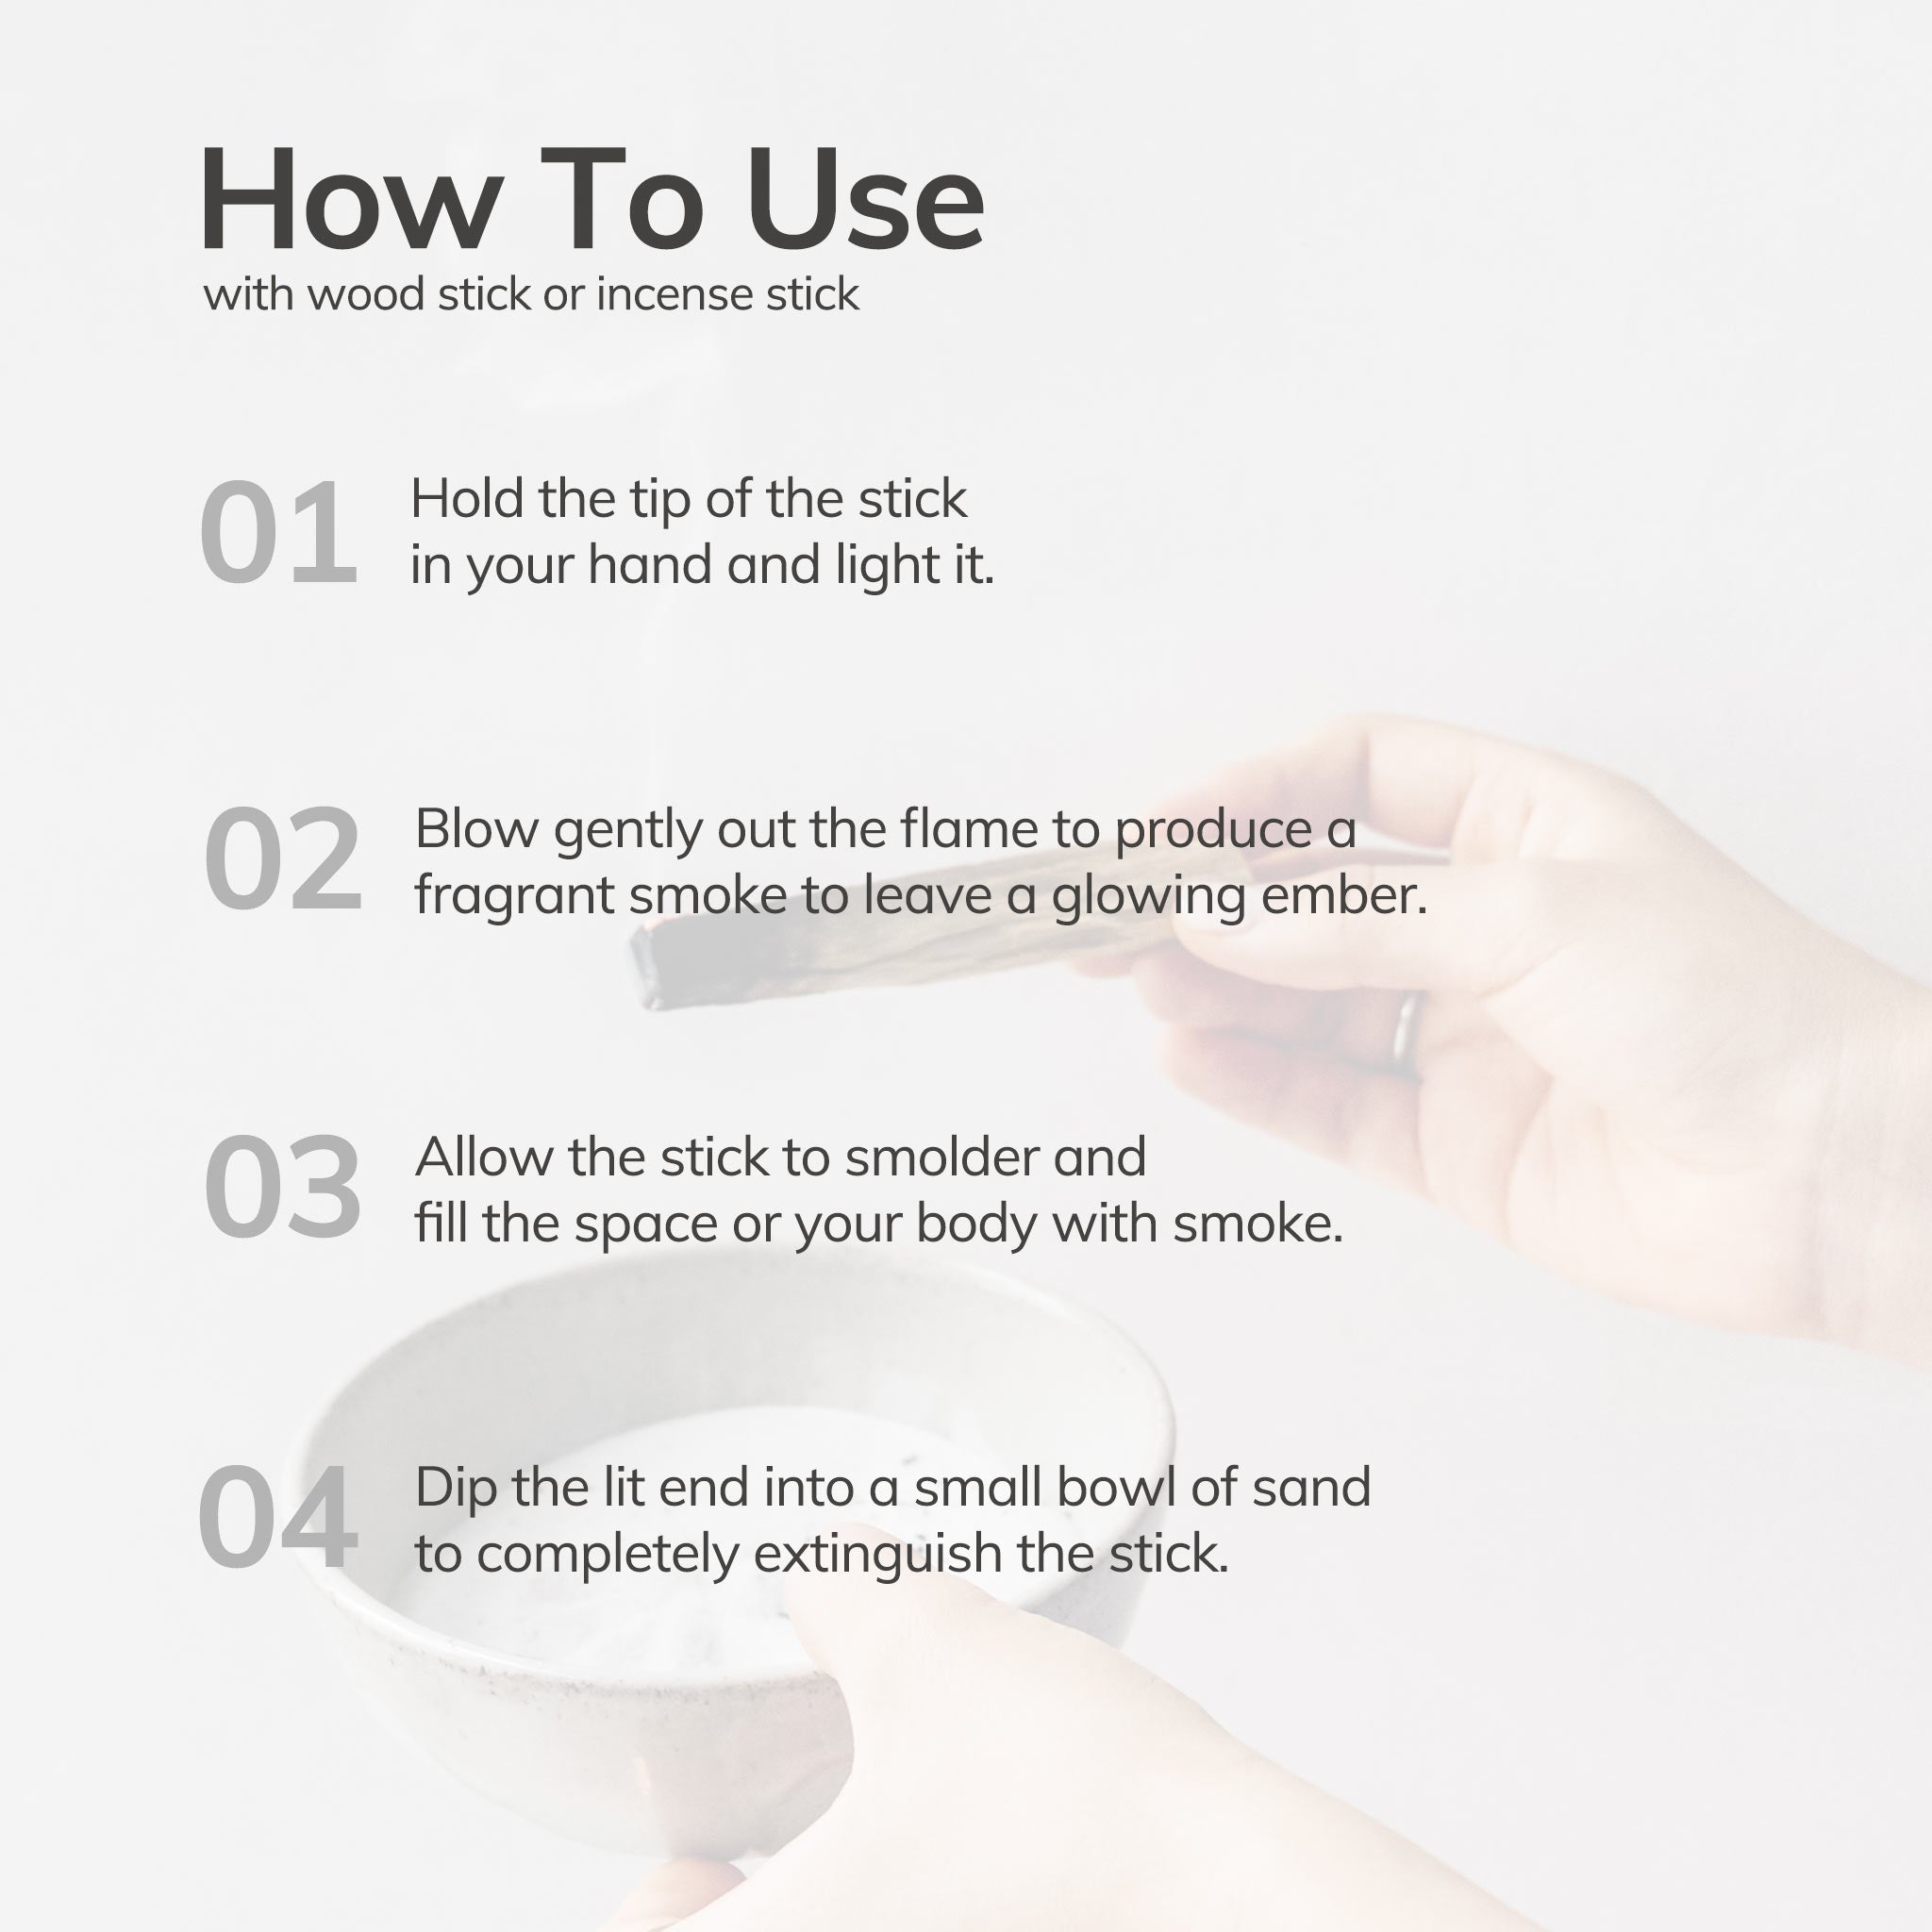 Chronological list of how to use with palo santo incense cones.